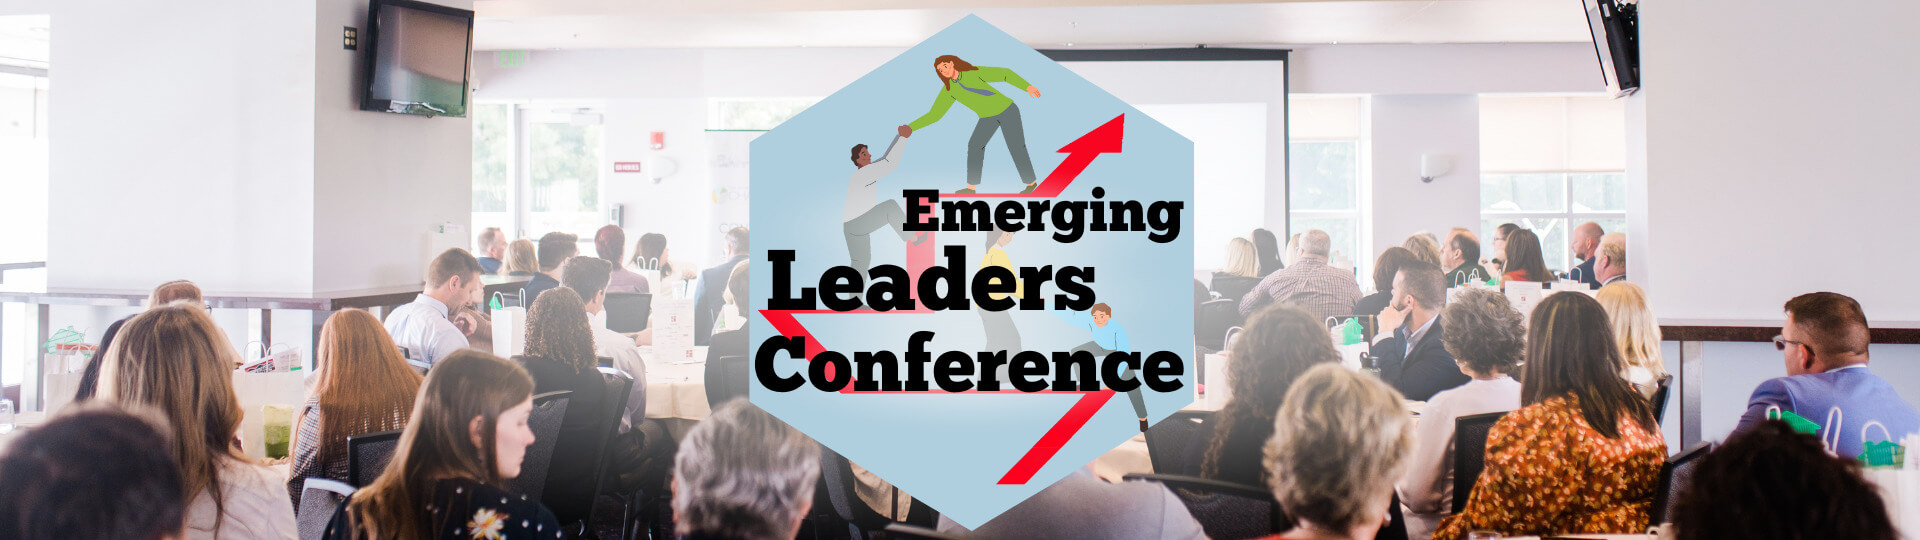 Emerging Leaders Conference (1920 x 540px)